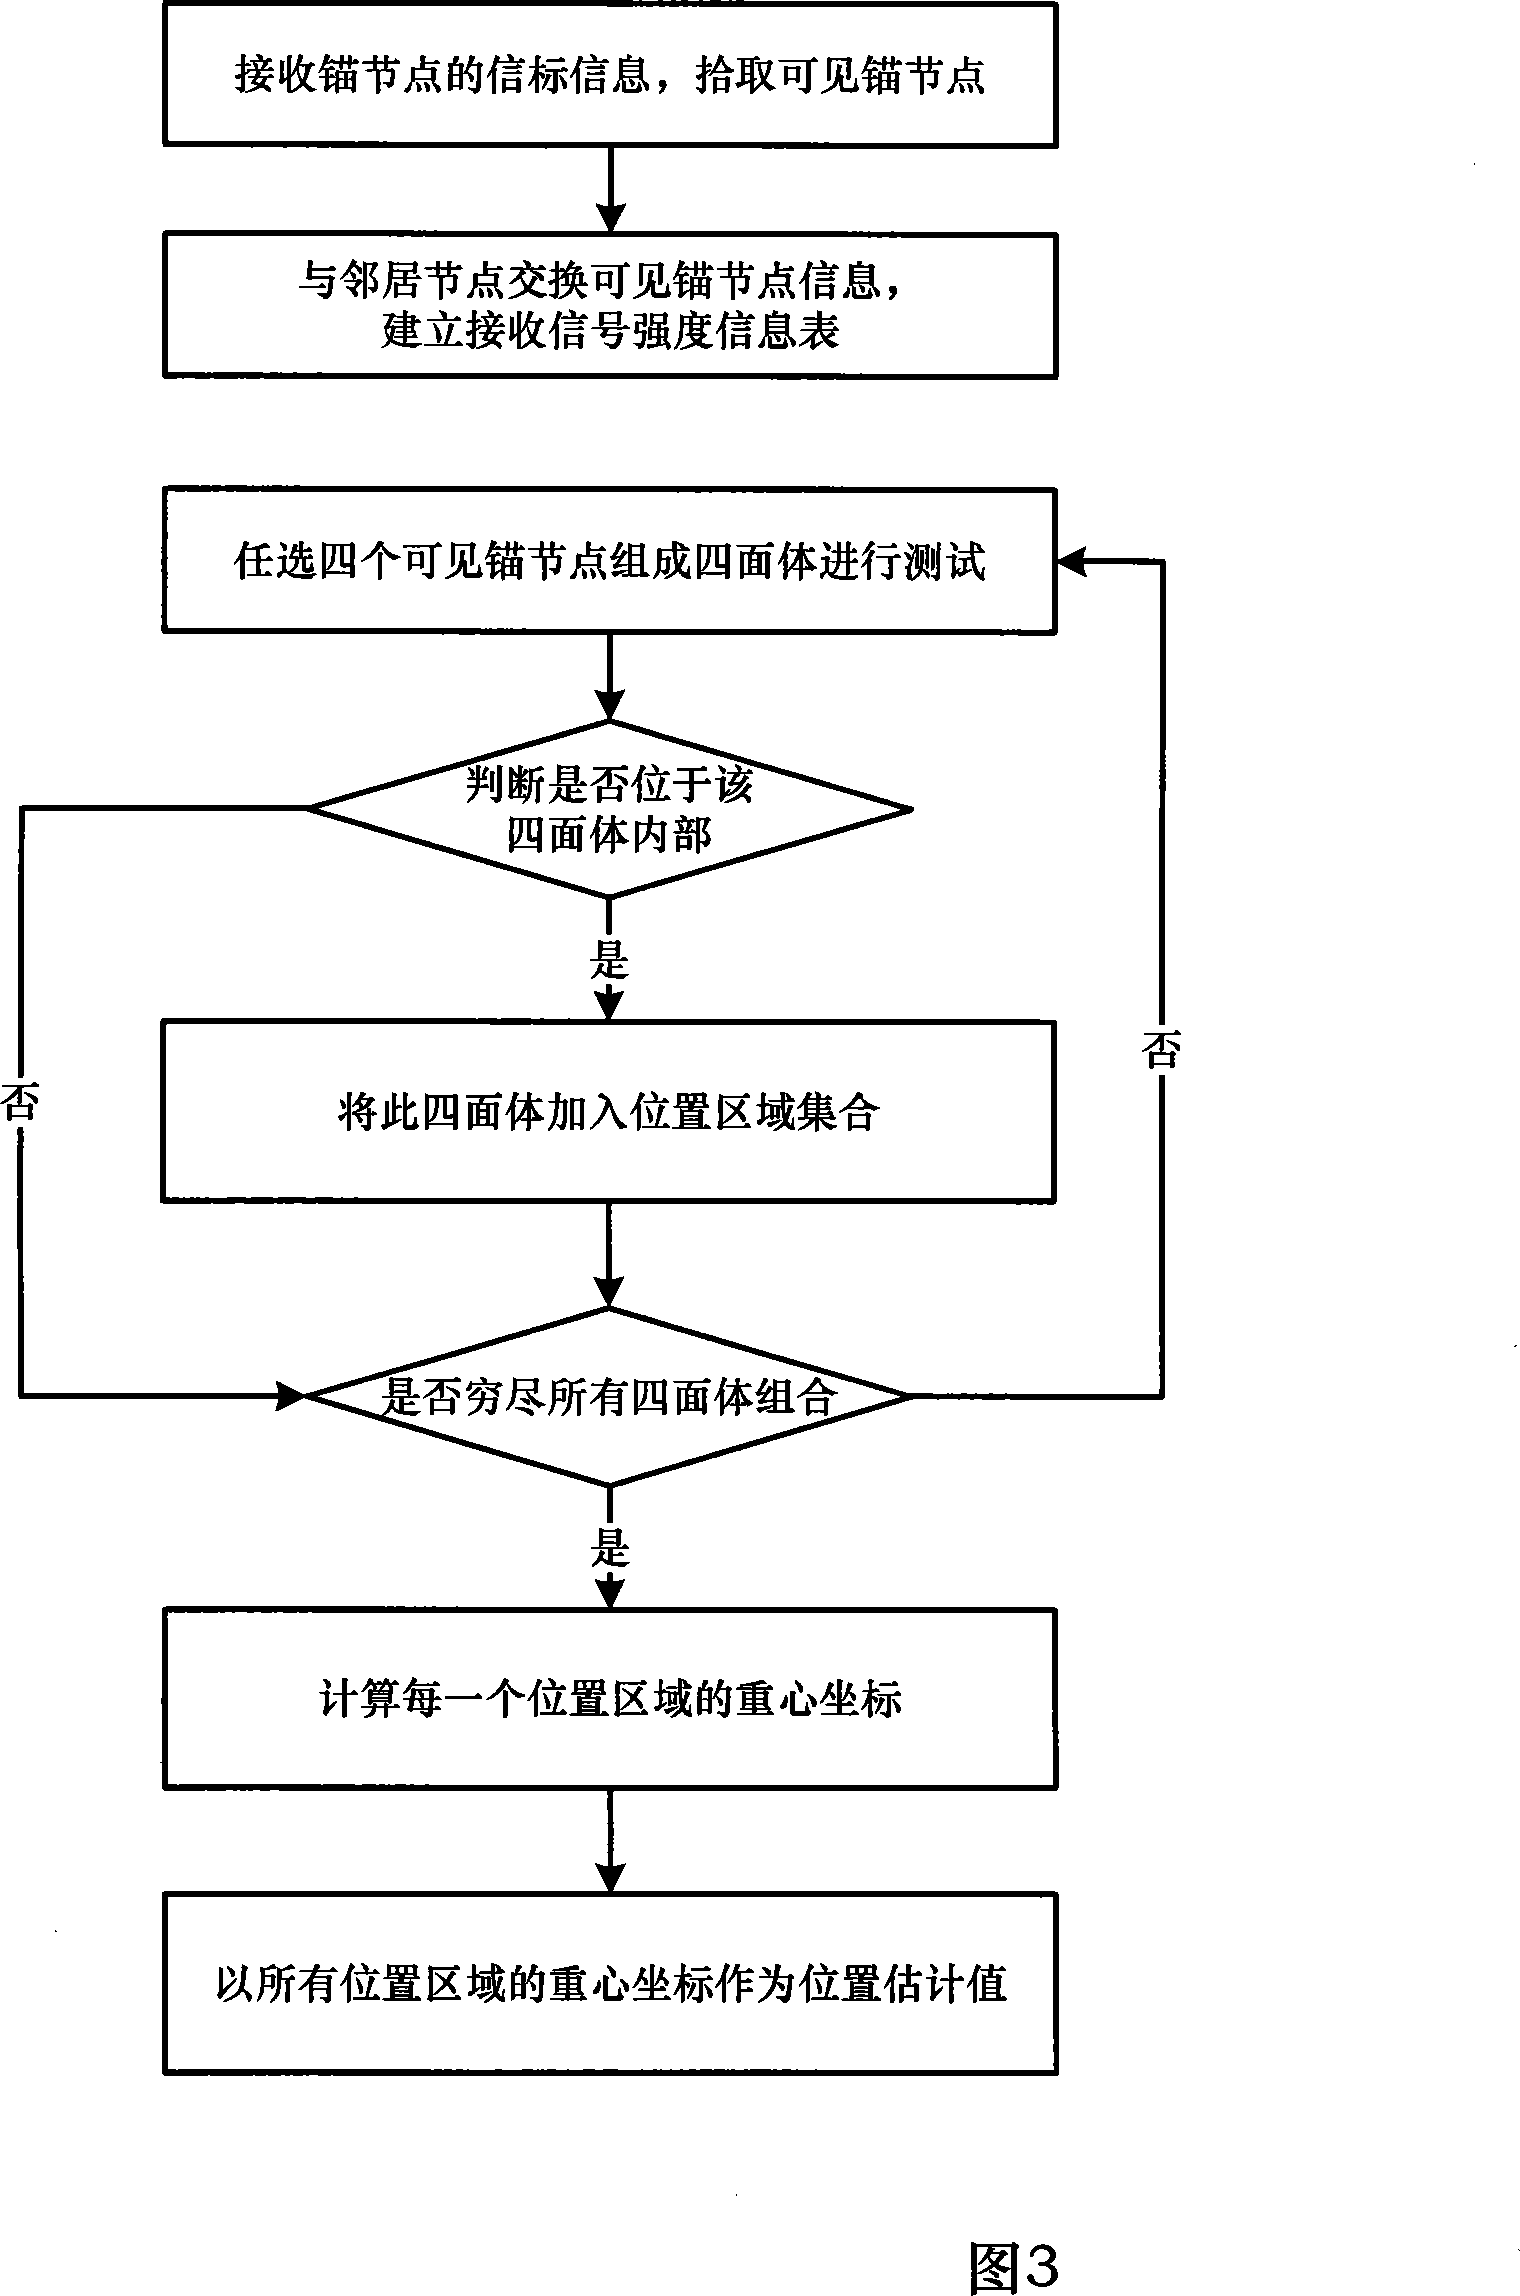 Wireless sensor network positioning system facing to three dimensional space